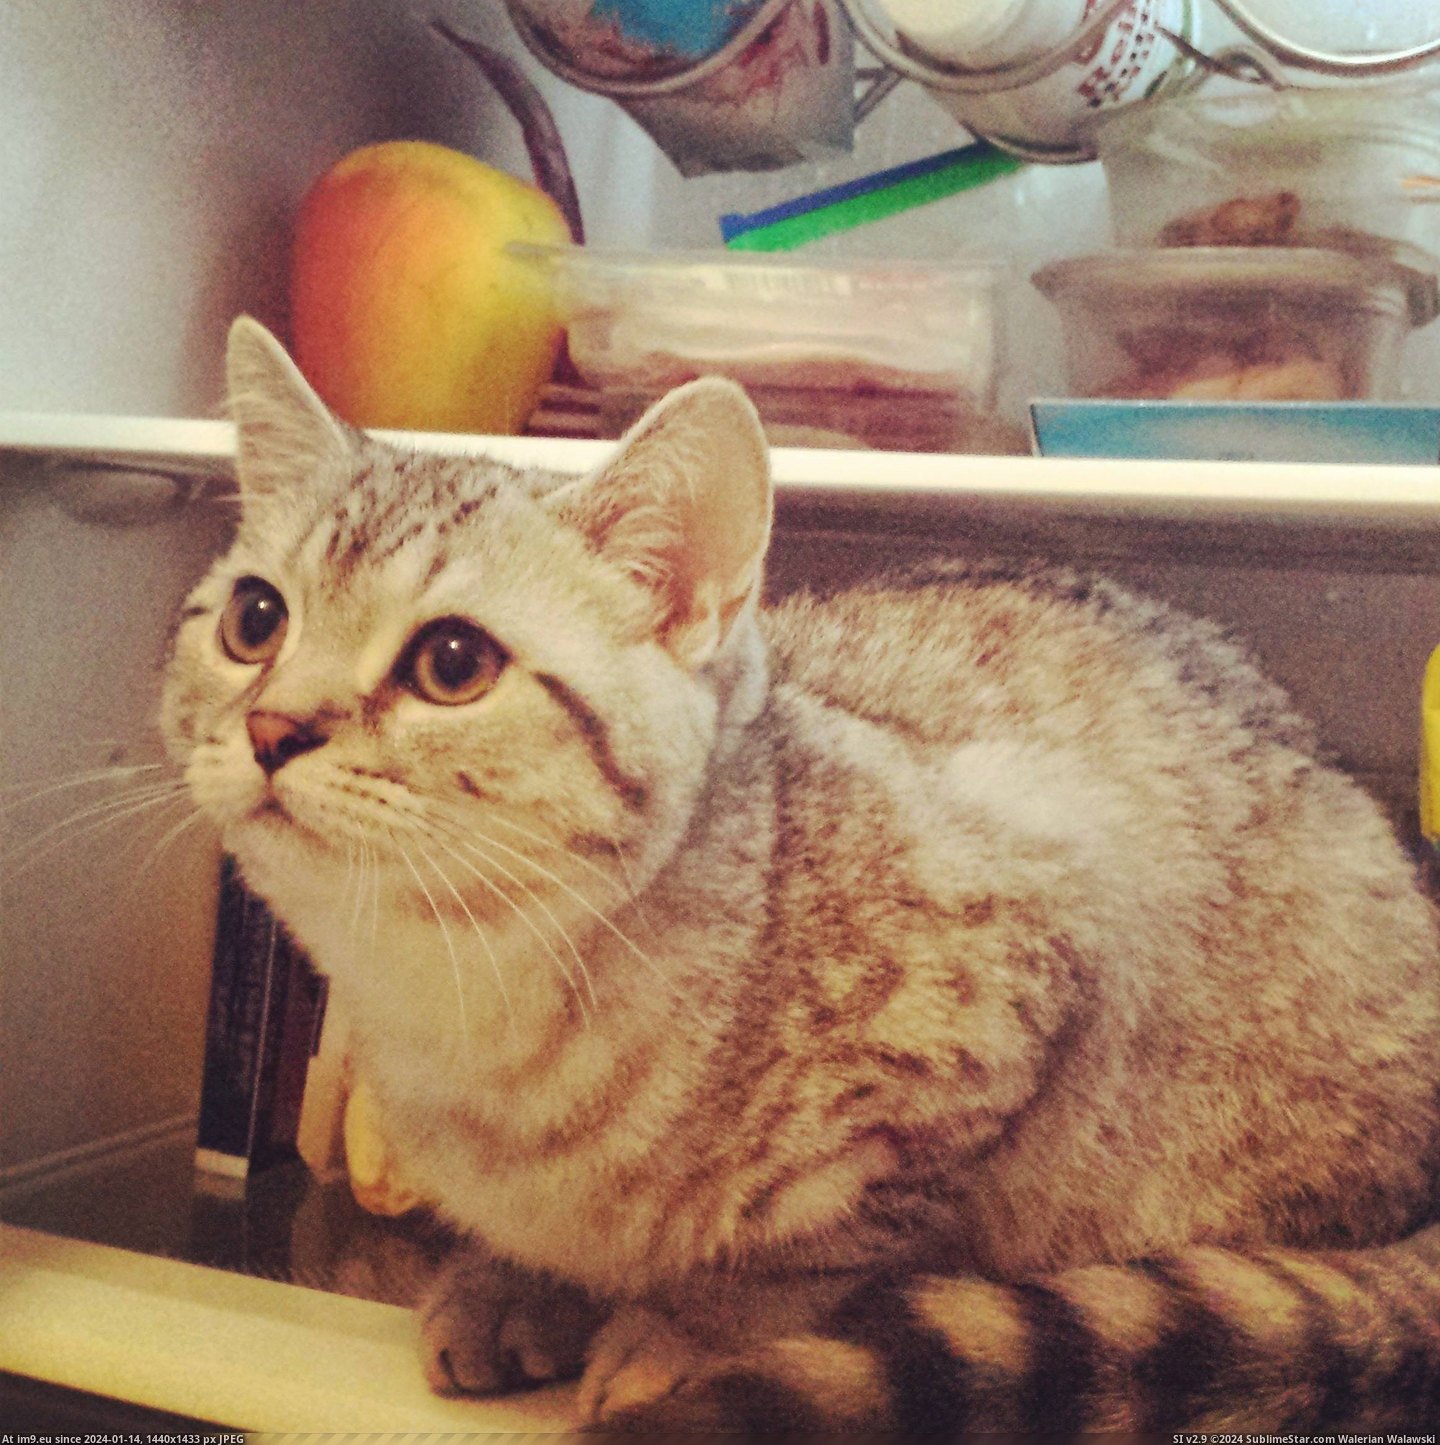 #Hot #Leave #Refuses #Jumped #Gary #Opened #Fridge [Aww] It's really hot at home, so when I opened the fridge Gary jumped in and now refuses to leave -.-' Pic. (Bild von album My r/AWW favs))